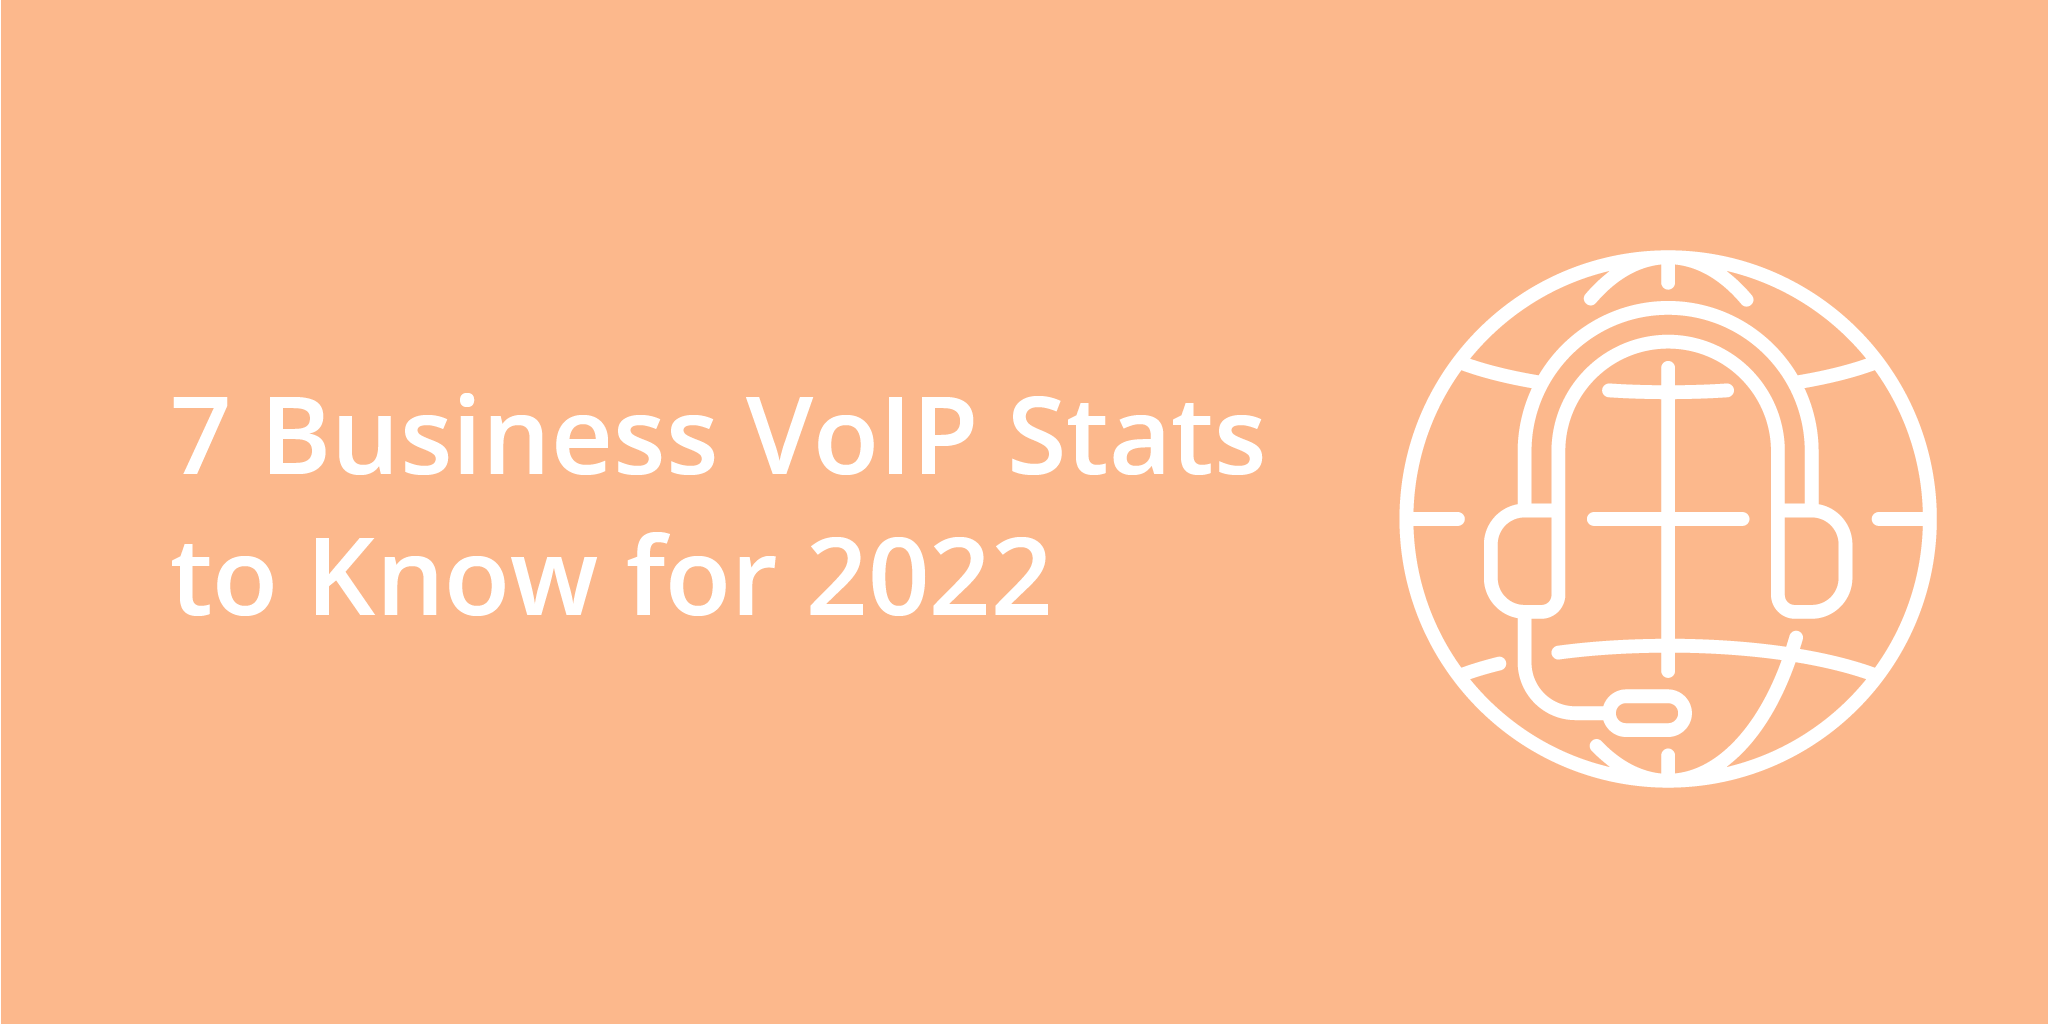 7 Business VoIP Stats to Know for 2022 | Telephones for business